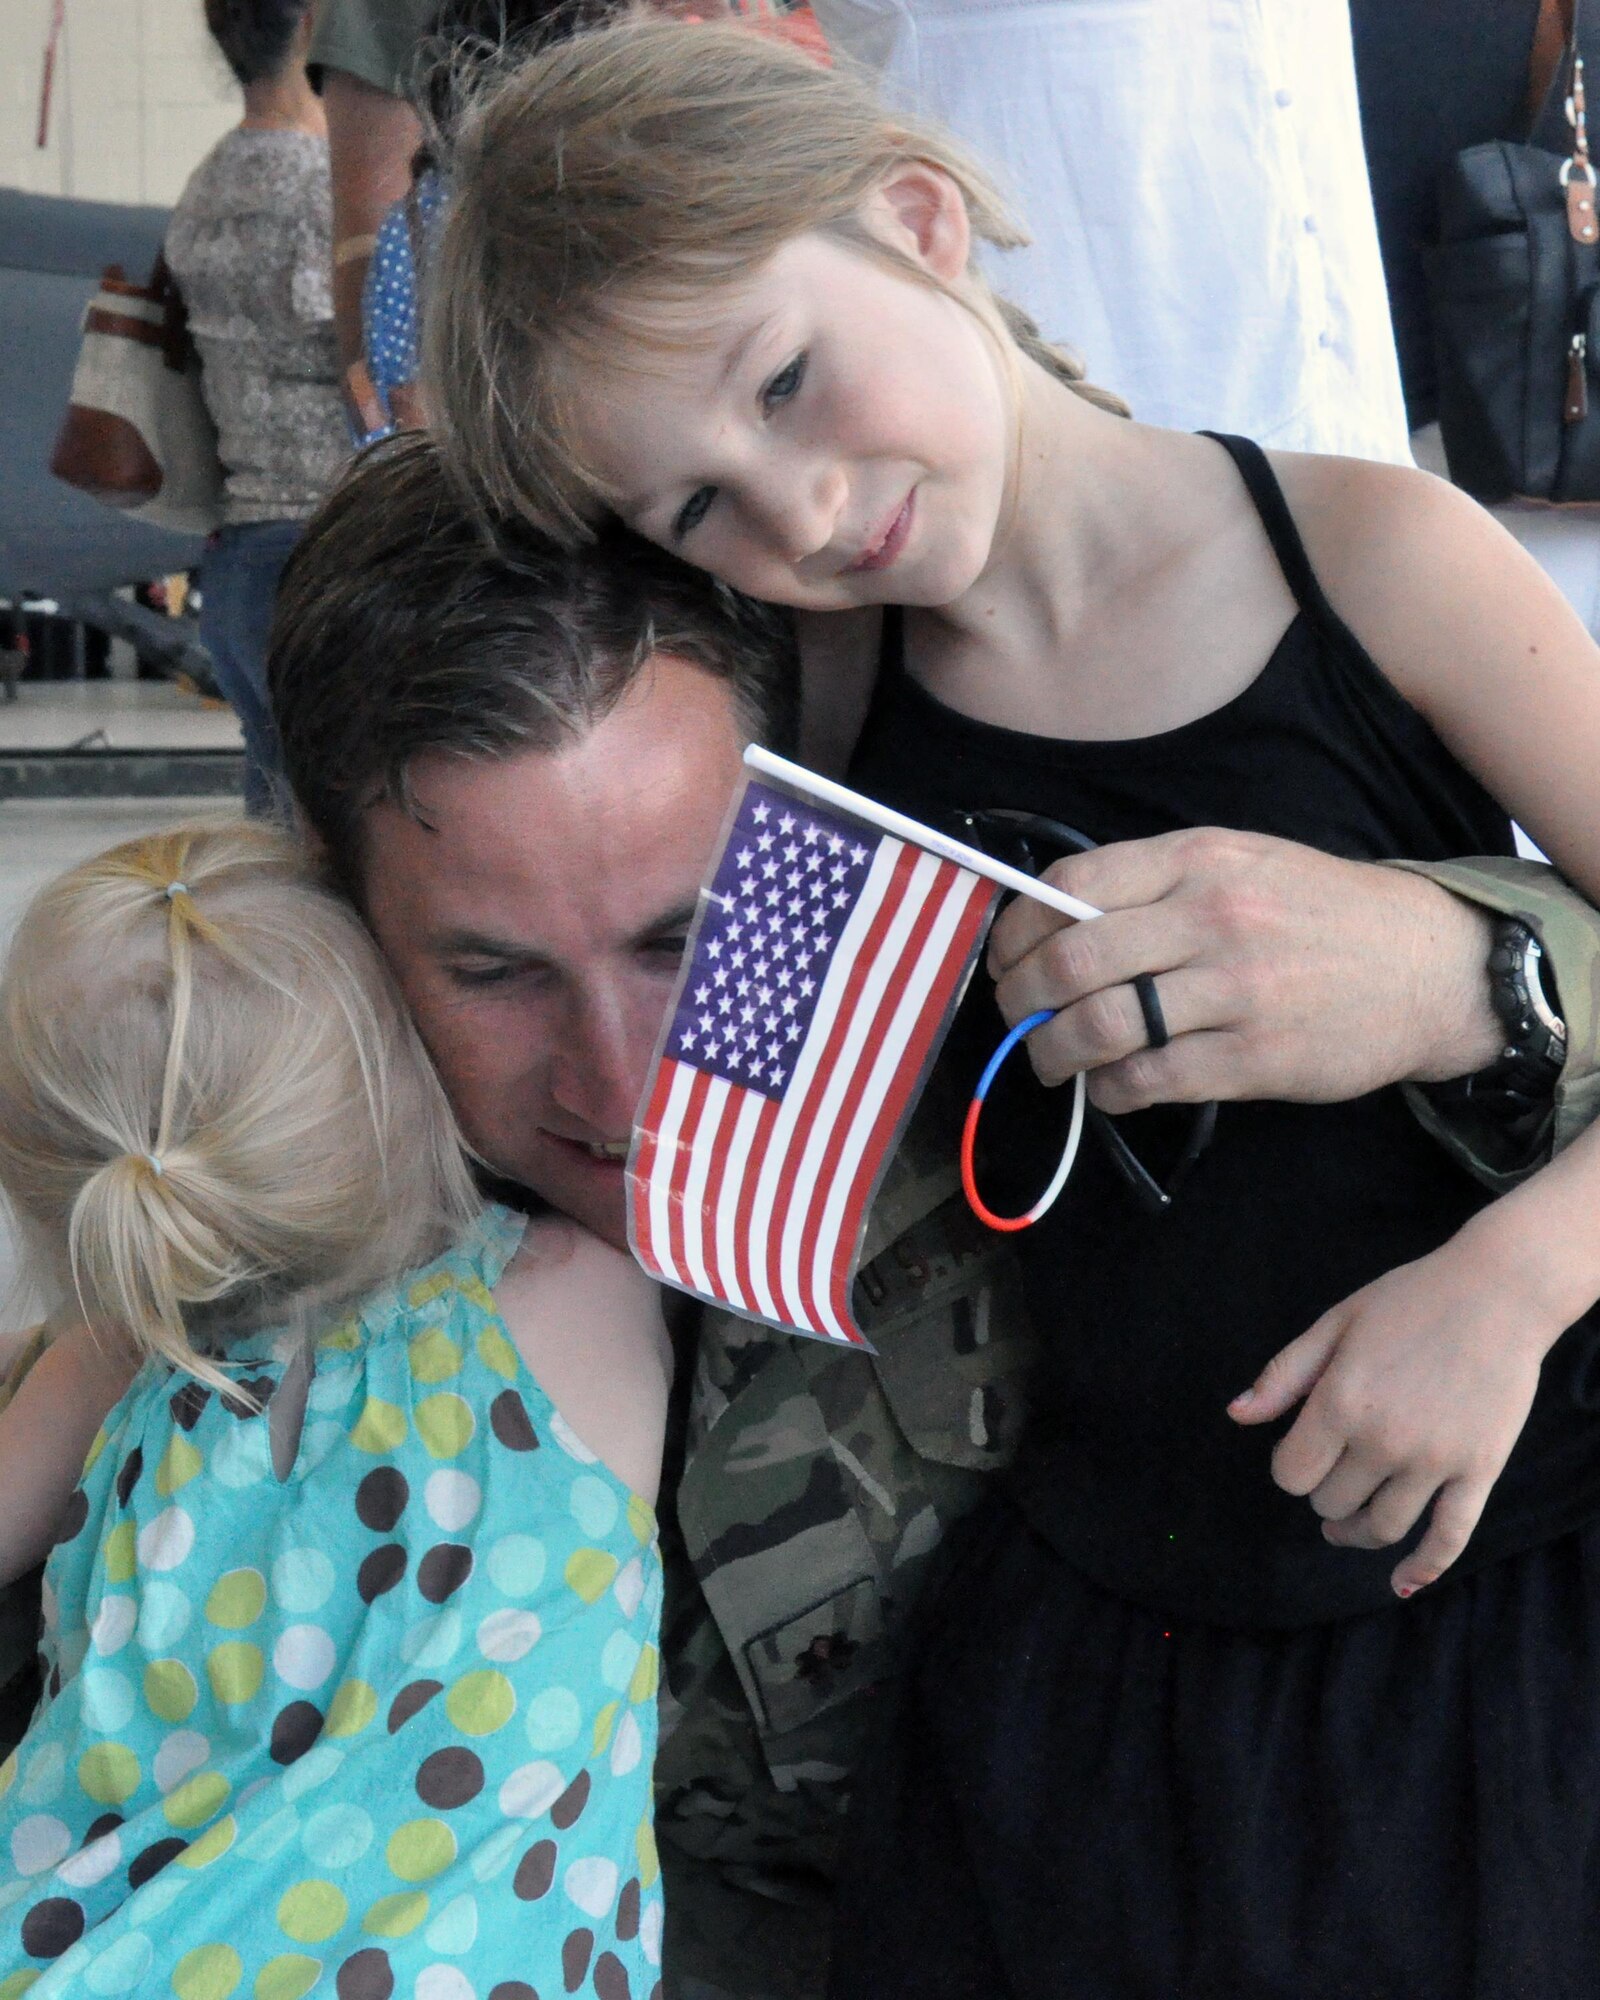 A combat rescue officer from the 306th Rescue Squadron hugs his daughters upon his return to Davis-Monthan Air Force Base, Ariz., from the Horn of Africa June 2. The 306th RQS is part of the 943rd Rescue Group, the Air Force Reserve Command's premier combat search and rescue group. They were deployed for four months and saved six lives during the deployment, flew more than 500 combat hours, conducted 67 parachute deployments, and provided more than 2,600 hours of dedicated alert coverage. (U.S. Air Force photo/Master Sgt. Greg Gaunt)